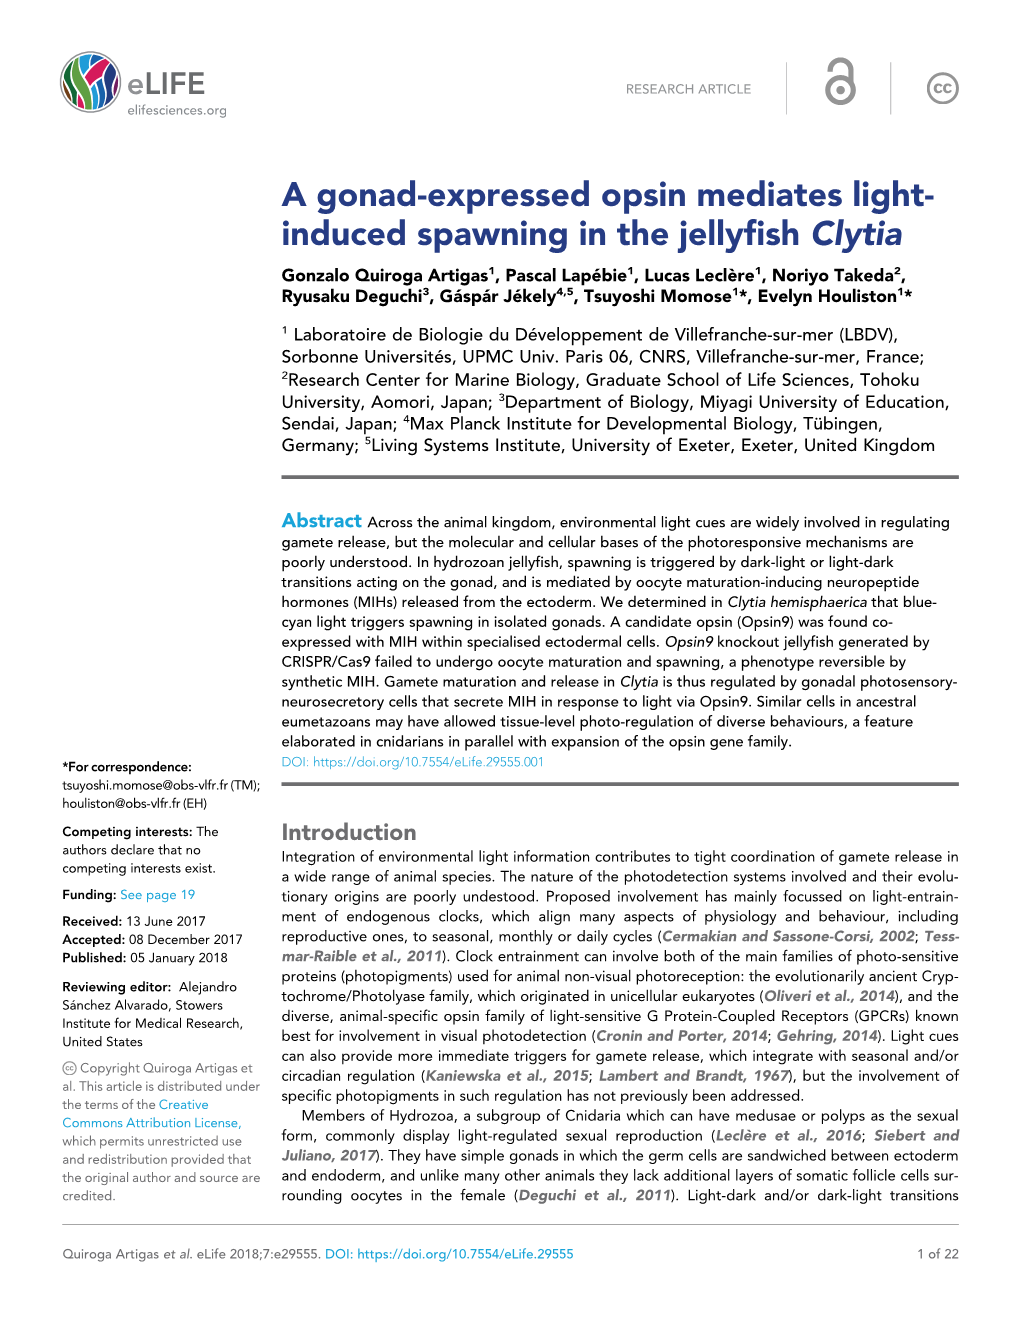 A Gonad-Expressed Opsin Mediates Light- Induced Spawning In